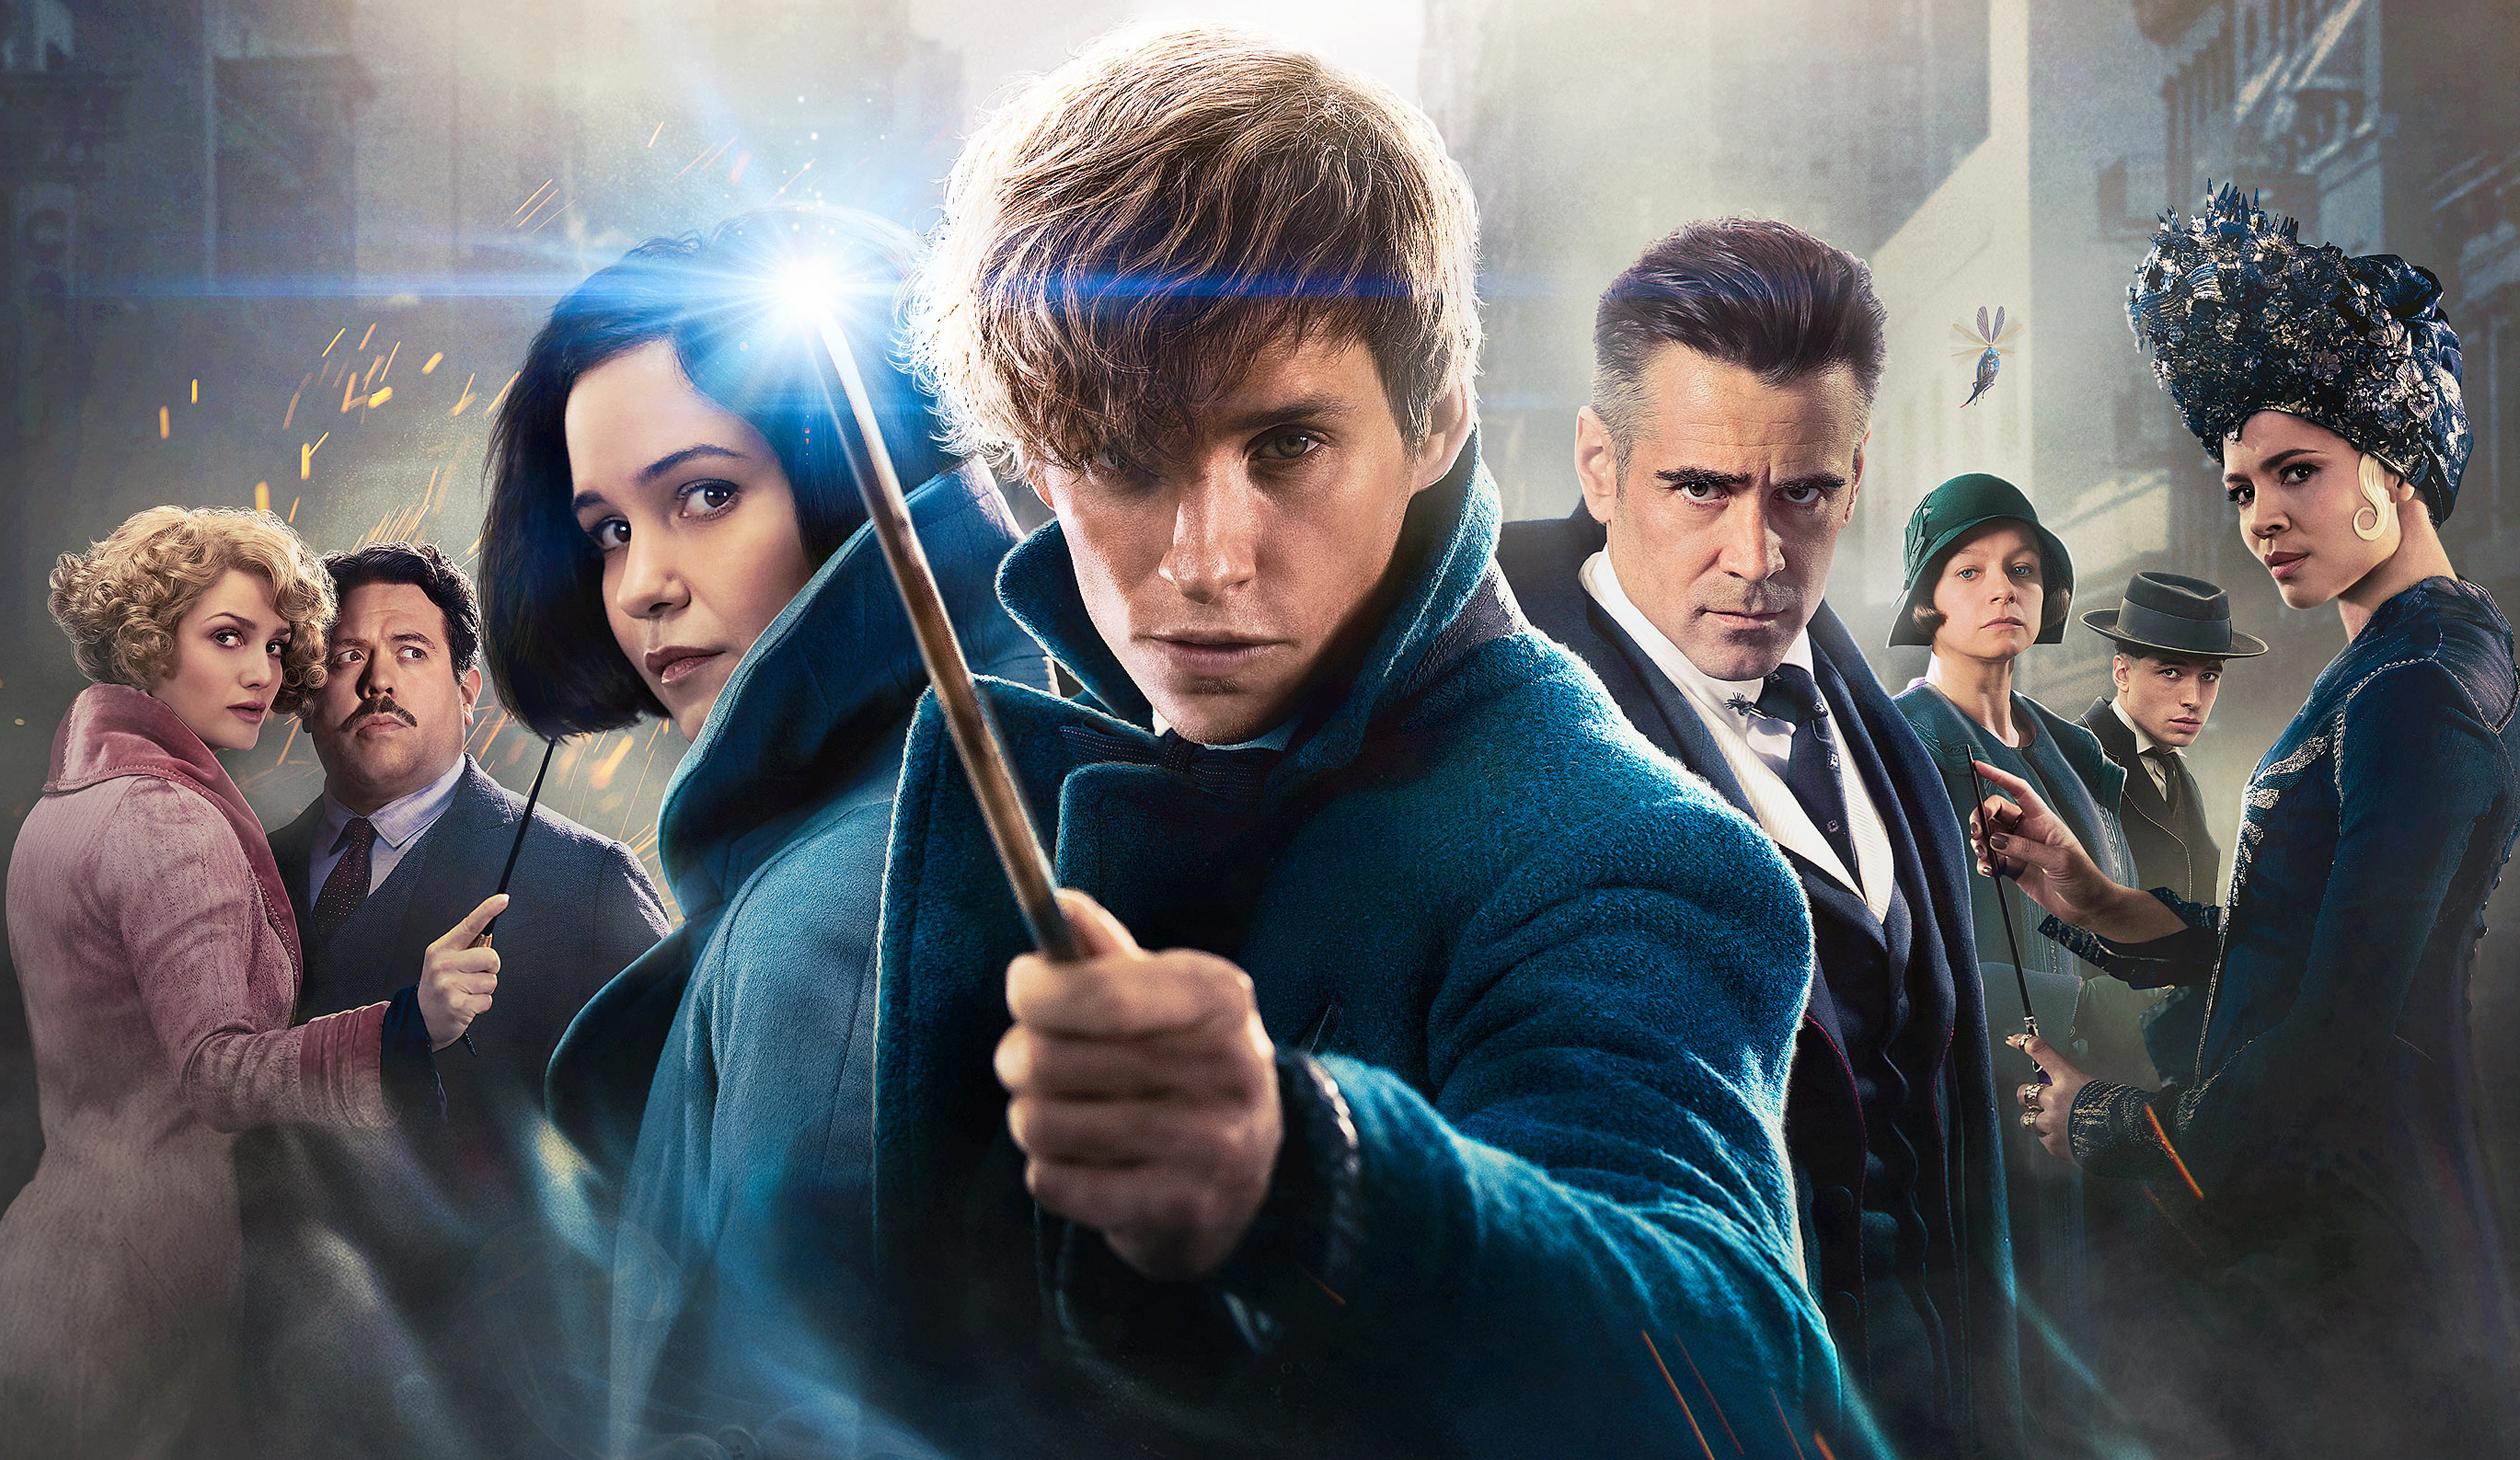 movie, fantastic beasts and where to find them, colin farrell, eddie redmayne, fantastic beasts